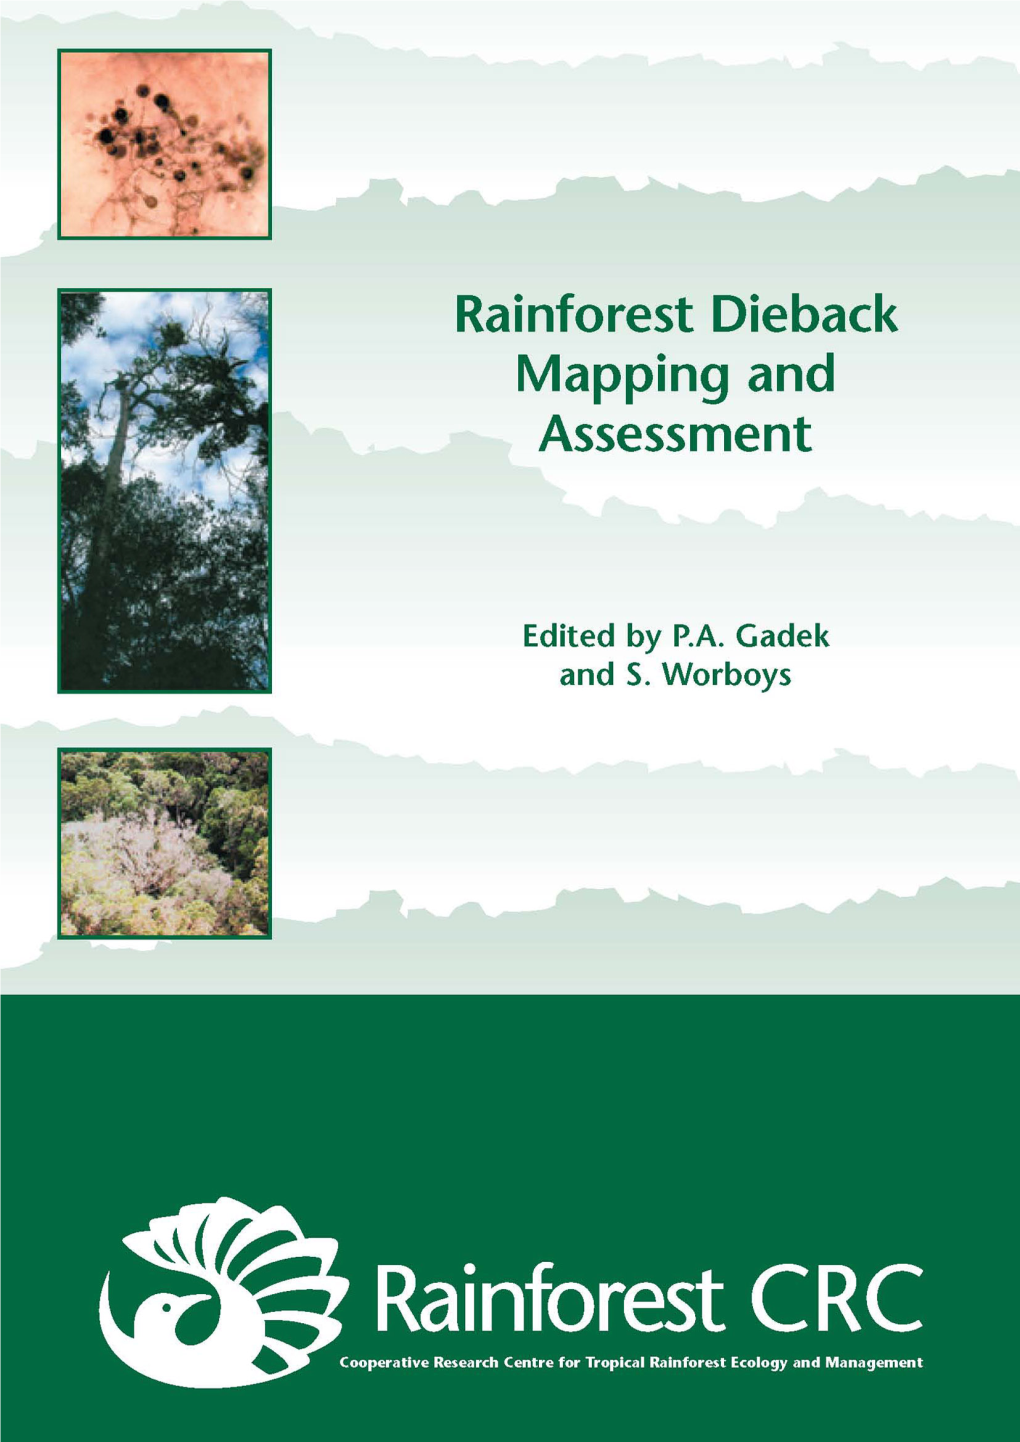 Phytophthora Species Diversity and Impacts of Dieback on Rainforest Canopies